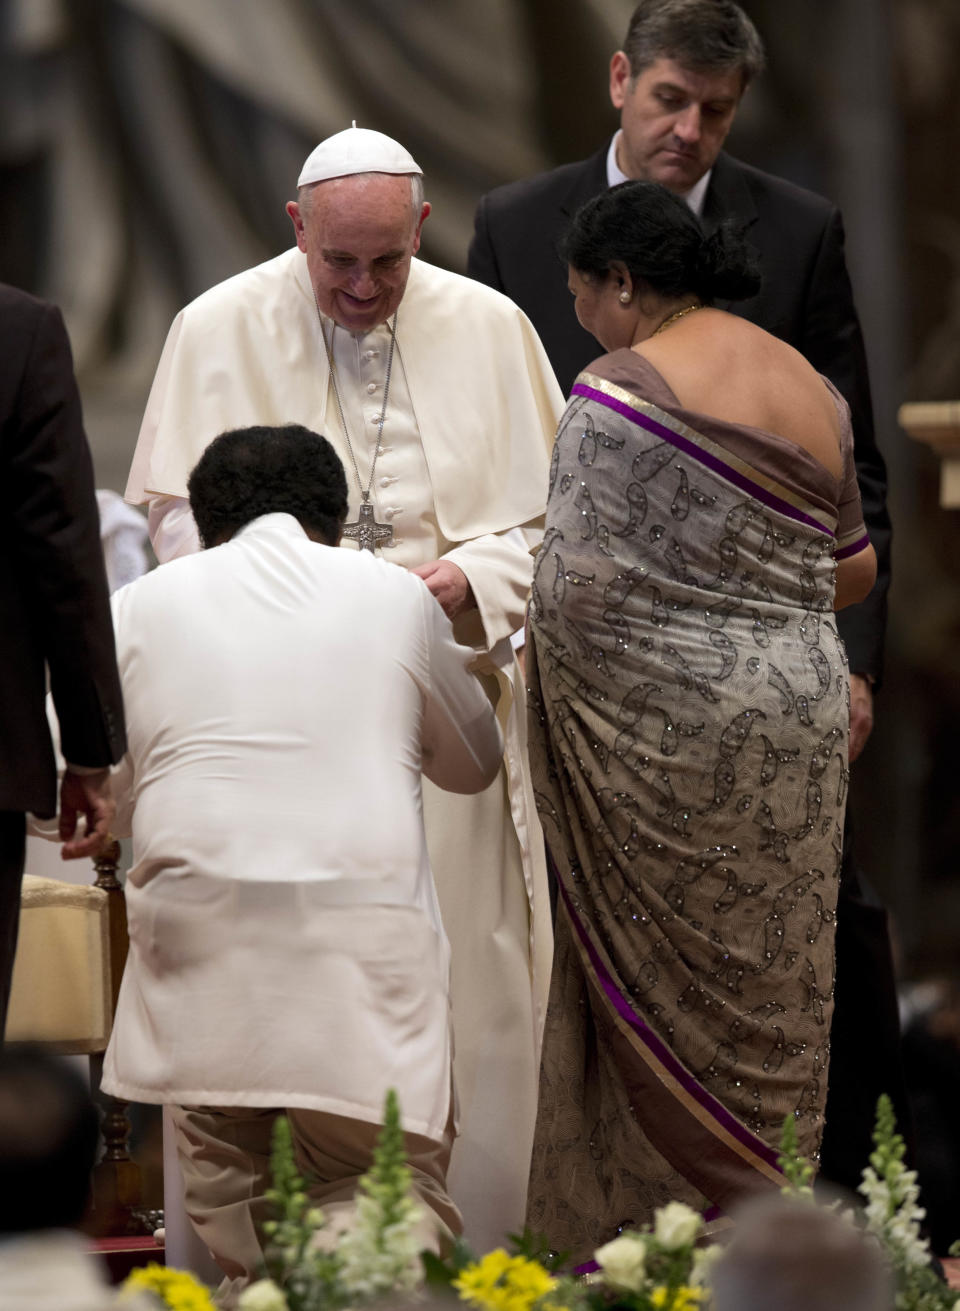 Members of the Sri Lankan community greet Pope Francis at the end of a mass in St. Peter's Basilica at the Vatican, Saturday, Feb. 8, 2014. (AP Photo/Alessandra Tarantino)